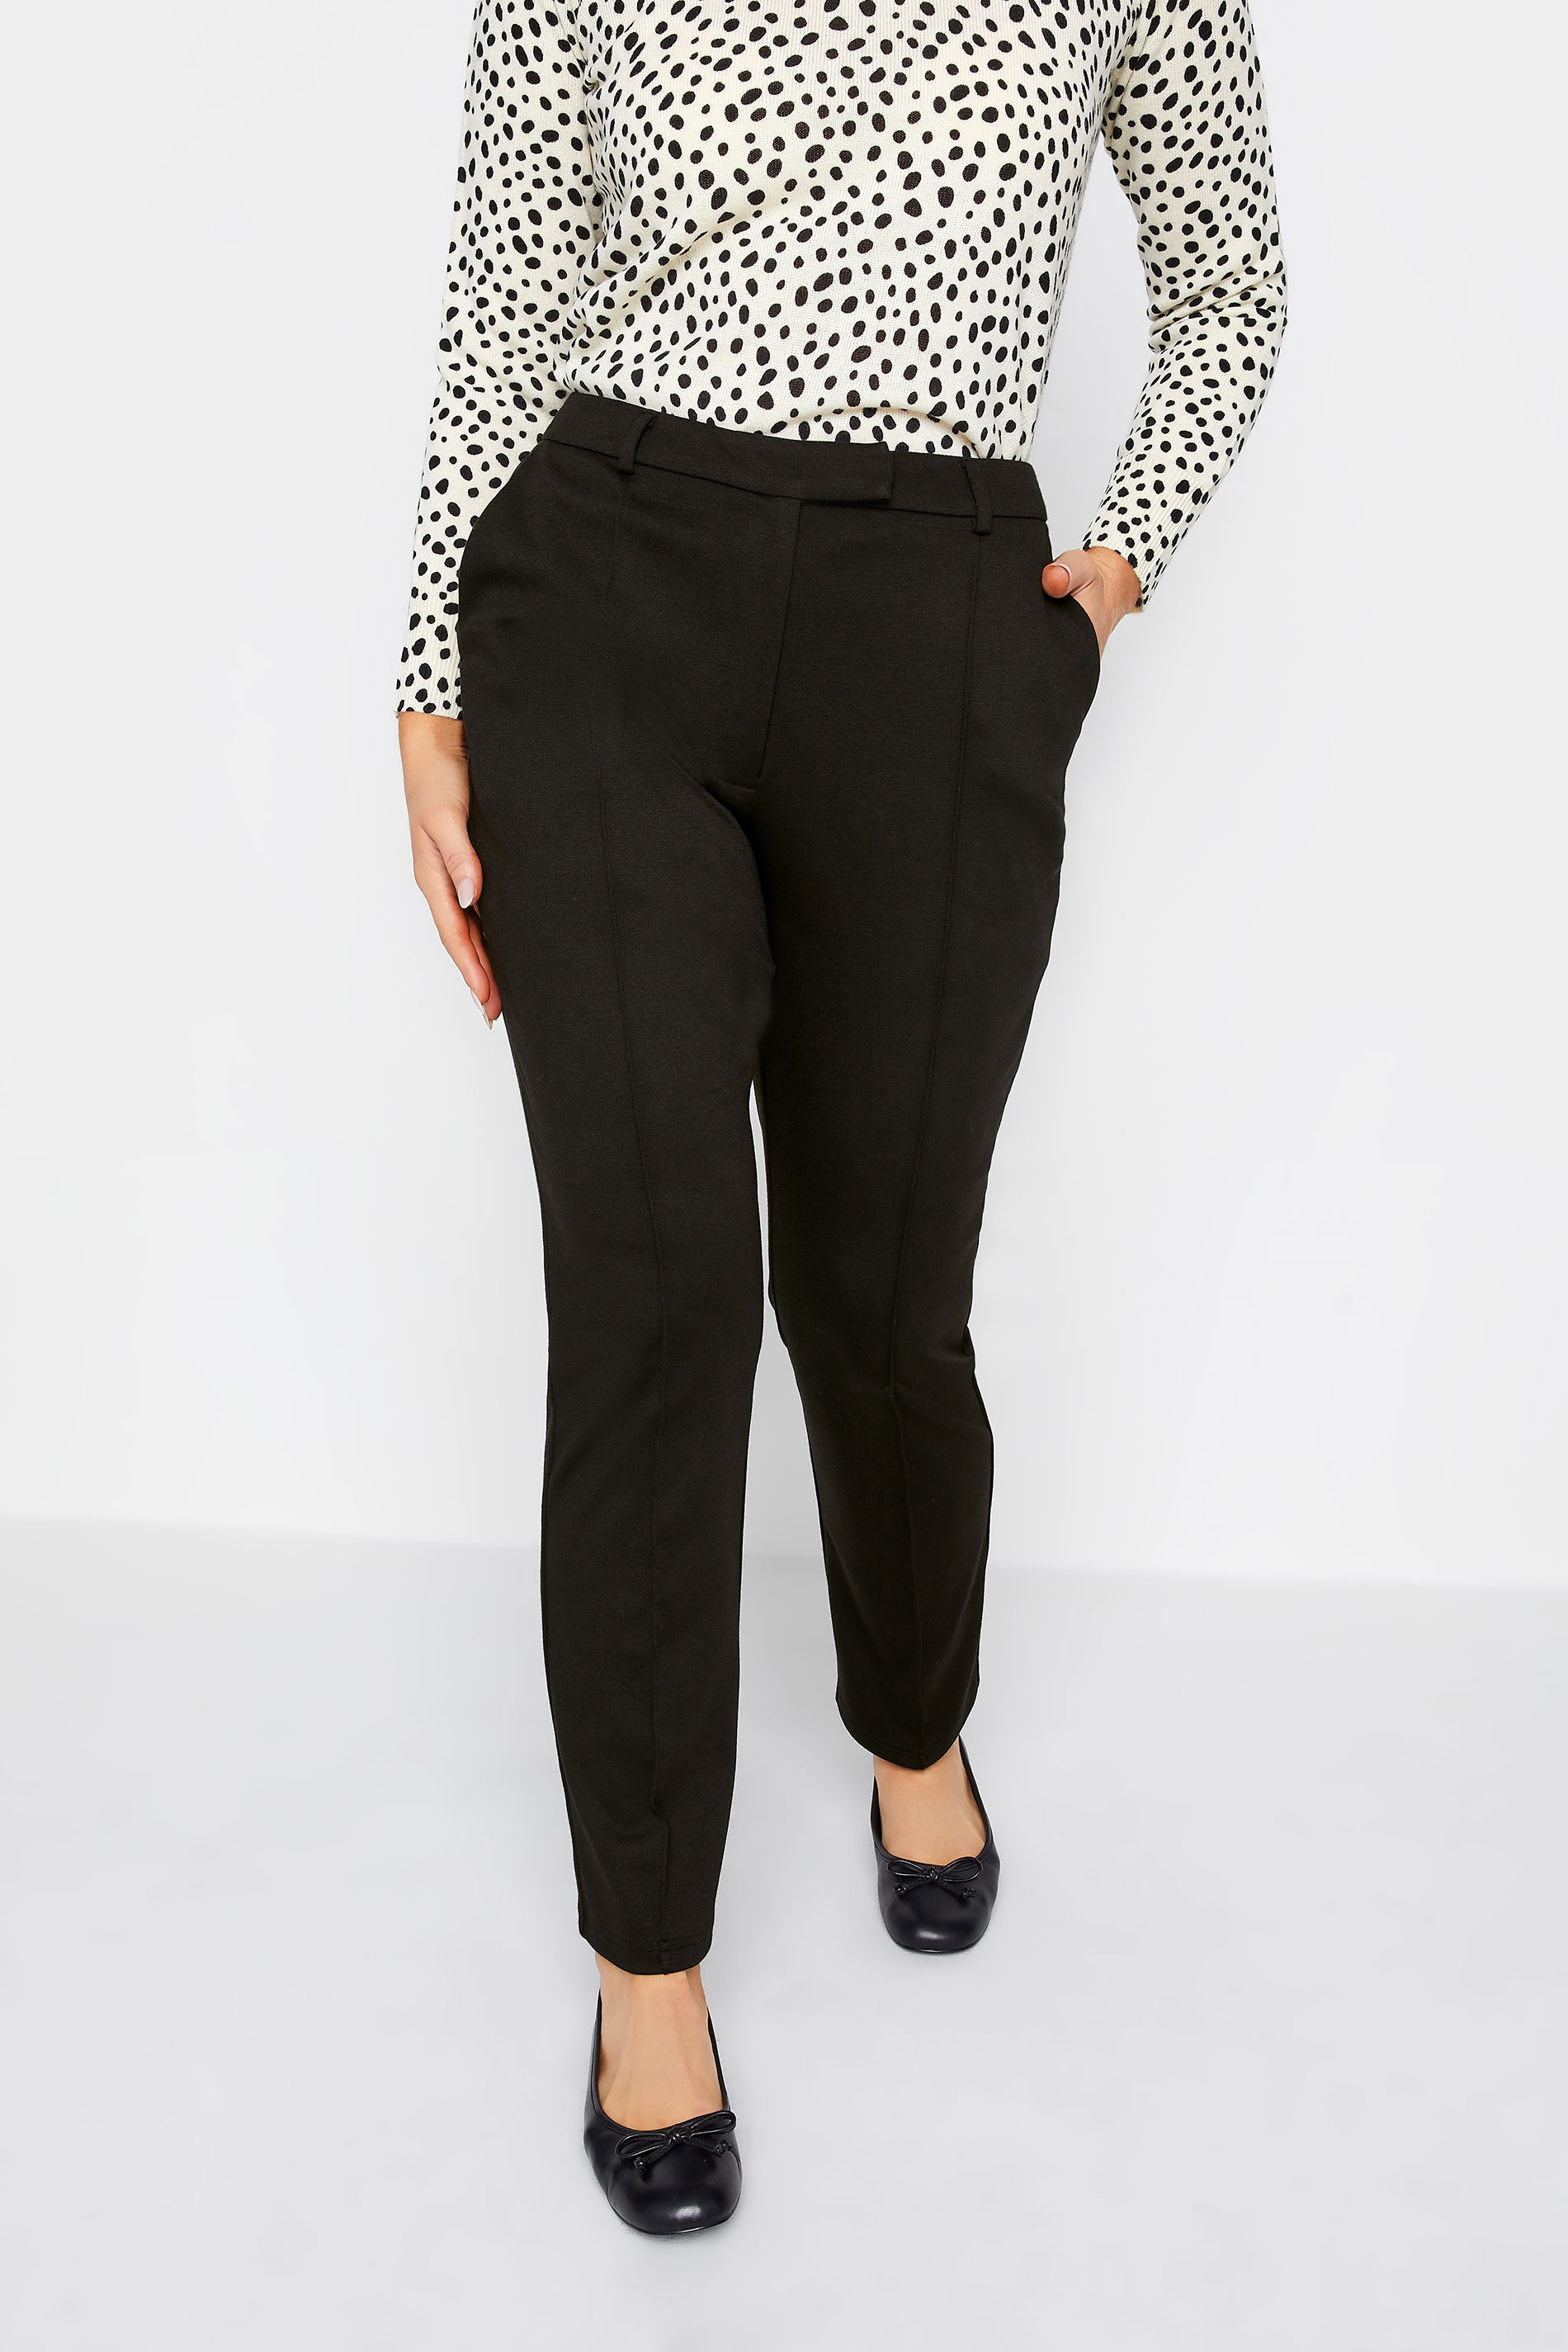 https://cdn.yoursclothing.com/Images/ProductImages/9e9ccf4b-c890-43_500359_A.jpg